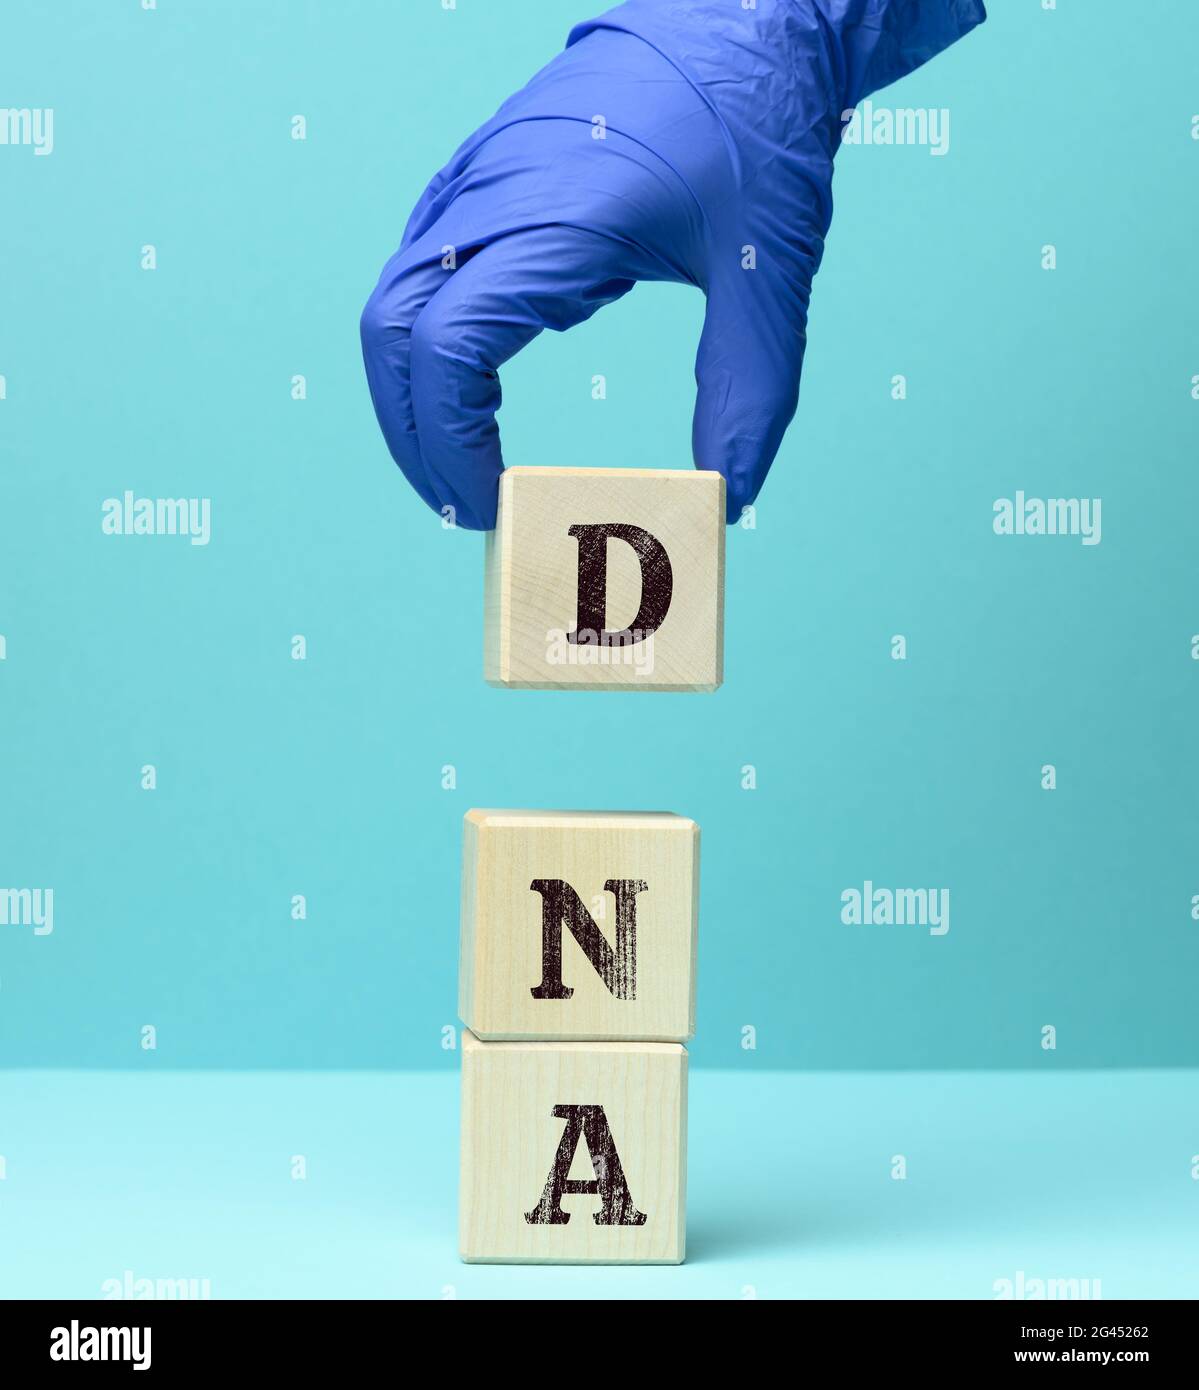 Abbreviation DNA on wooden square blocks, blue background Stock Photo